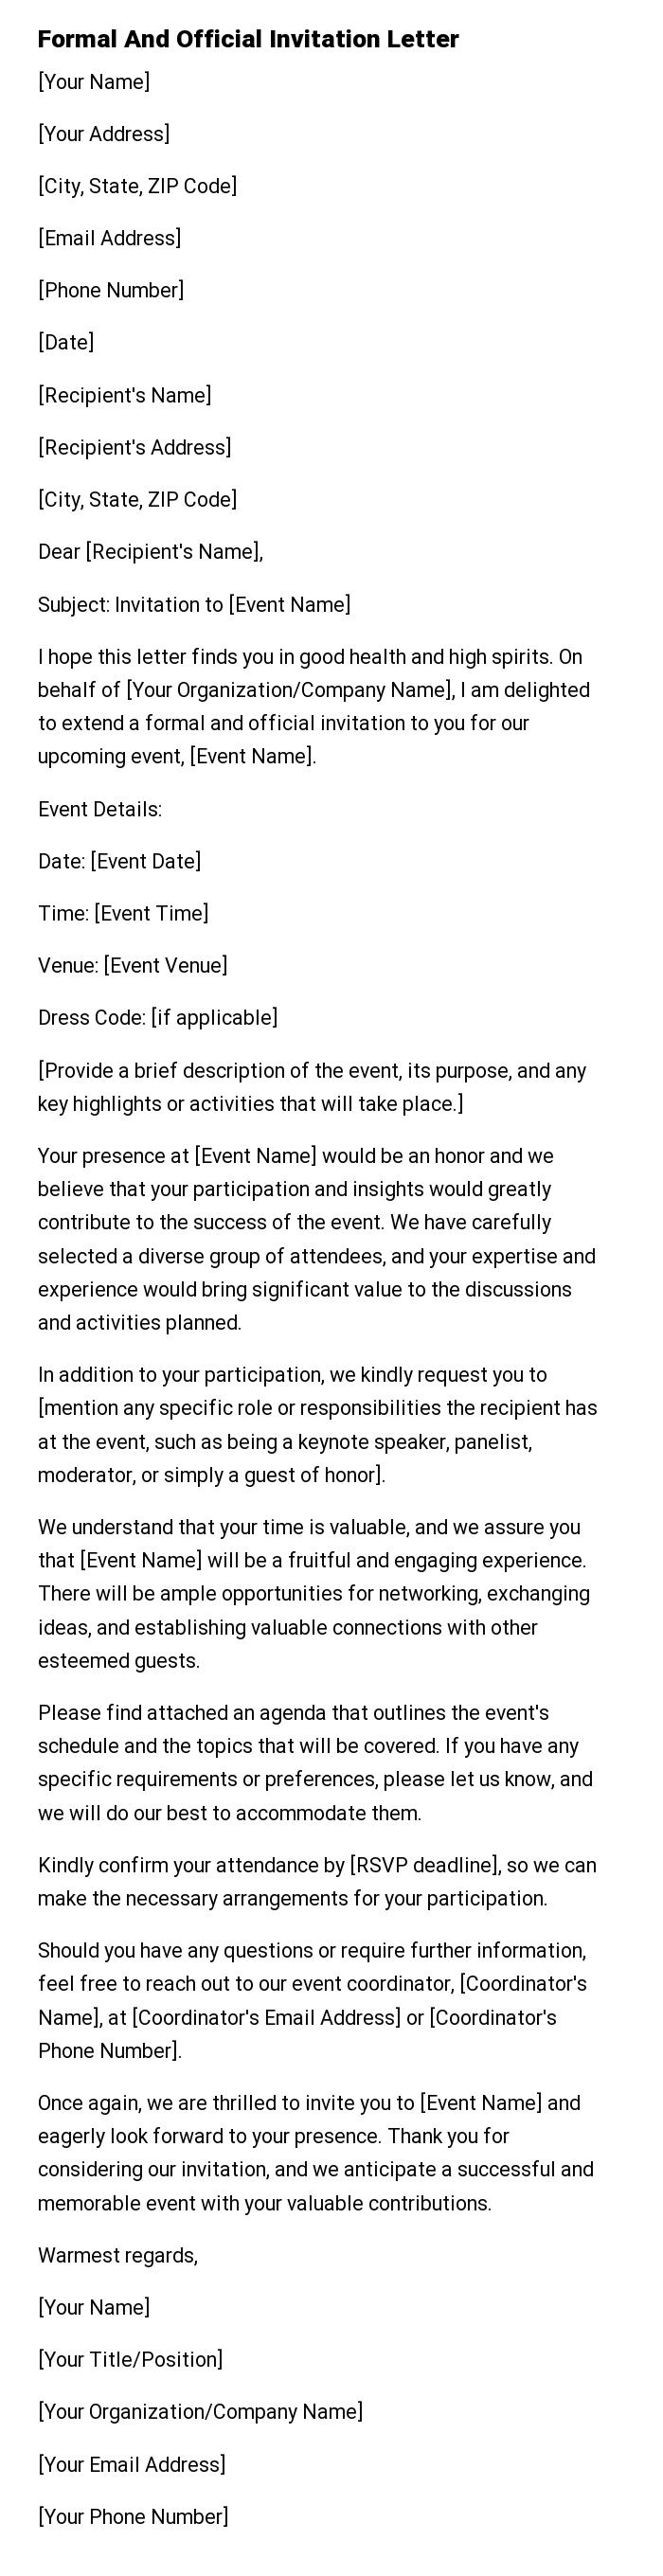 Formal And Official Invitation Letter